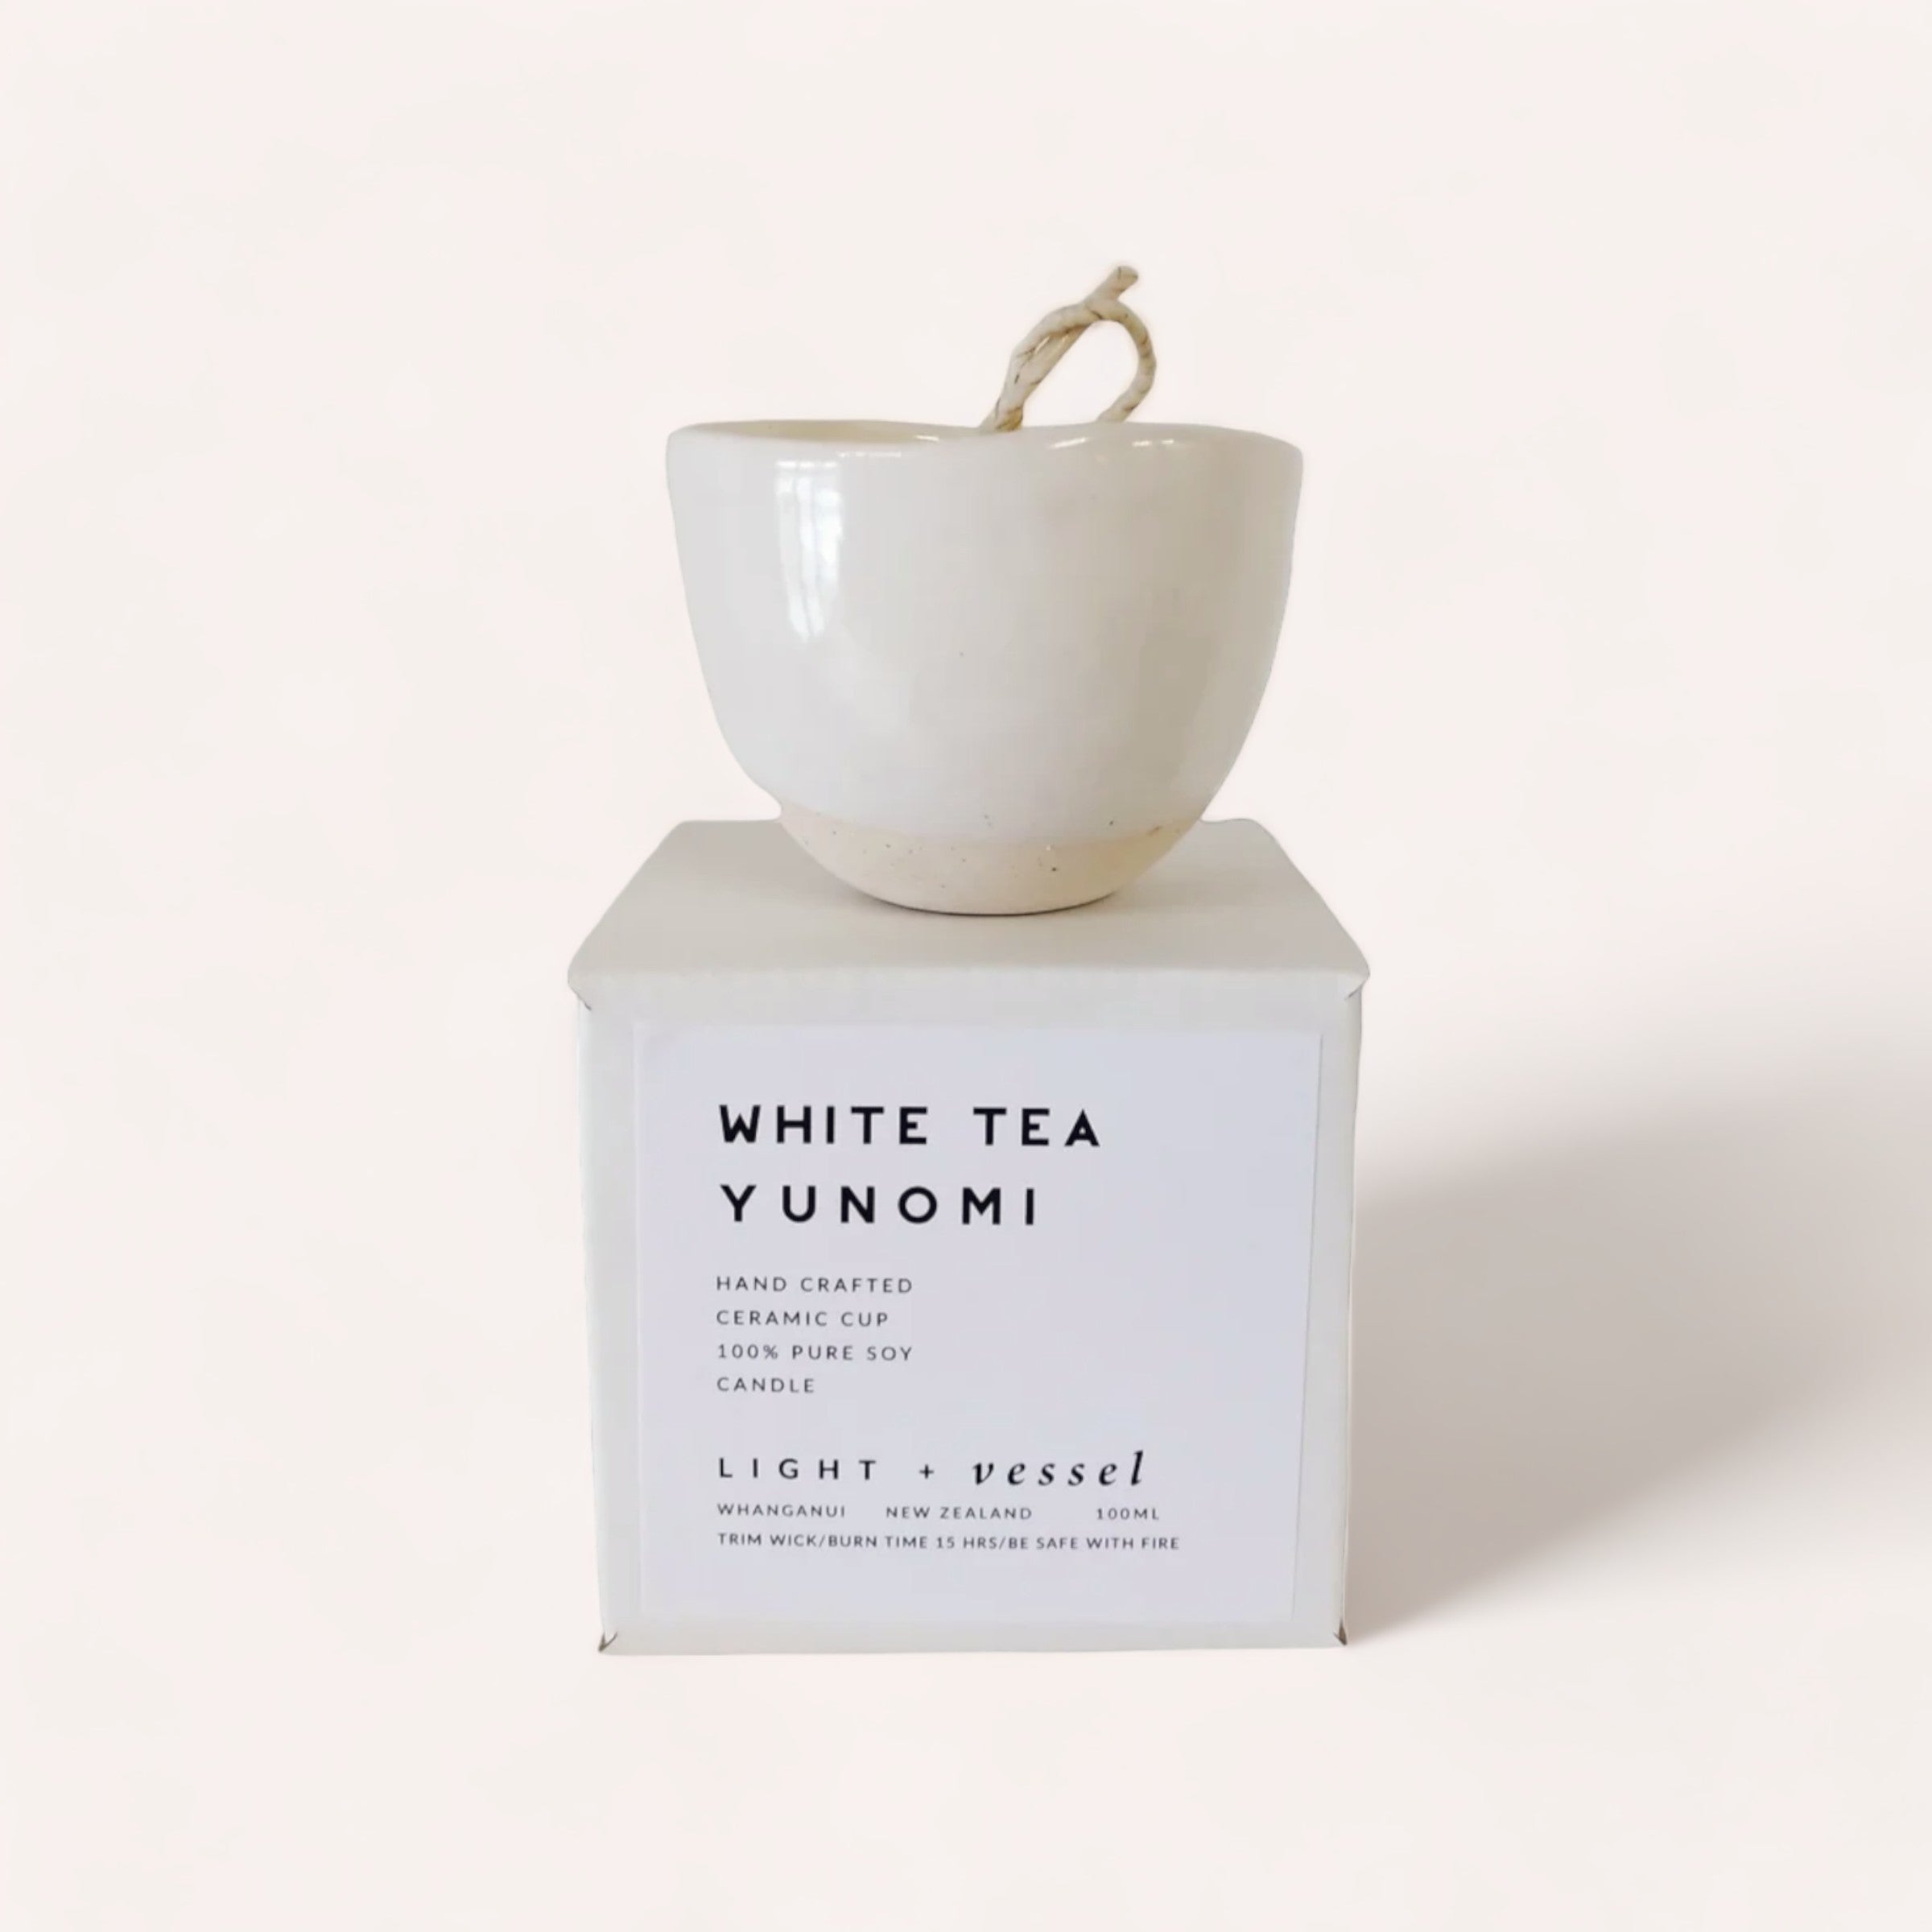 A white ceramic yunomi-style cup placed on top of its packaging box, which is labeled as a "White Tea Candle" by "Light + Vessel" with the